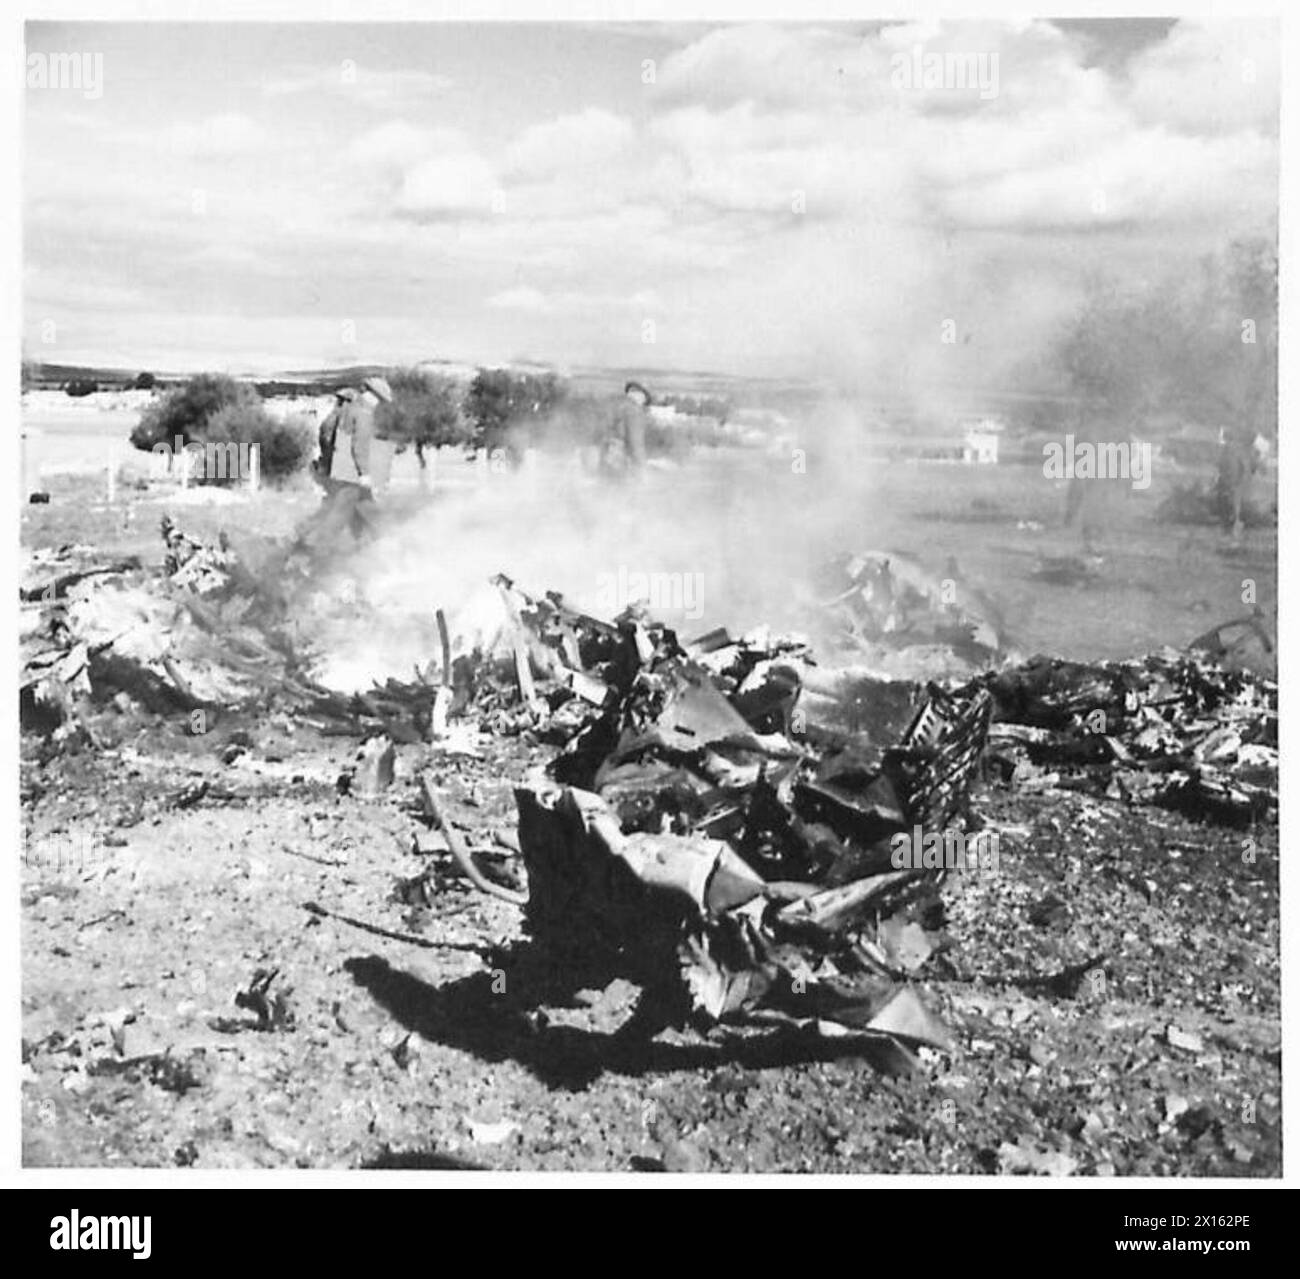 THE BRITISH ARMY IN THE TUNISIA CAMPAIGN, NOVEMBER 1942-MAY 1943 - One of the two JU 88s shot down in Bou Arada, the crew were burnt to death. The battle at Bou Arada flared up again. The Germans attacked from the 'Two Tree Hill' with tanks and infantry. Troops of the British V Corps in position on the 'Green Hill' (about 5000 yards away from the 'Two Tree Hill') held and beat back the attack. 17 German tanks were destroyed by British 25 pounder guns. The battle continued all day with Messerschmitts and Junkers dive bombing British positions. One ME and two JU 88s were shot down. 18 January 19 Stock Photo